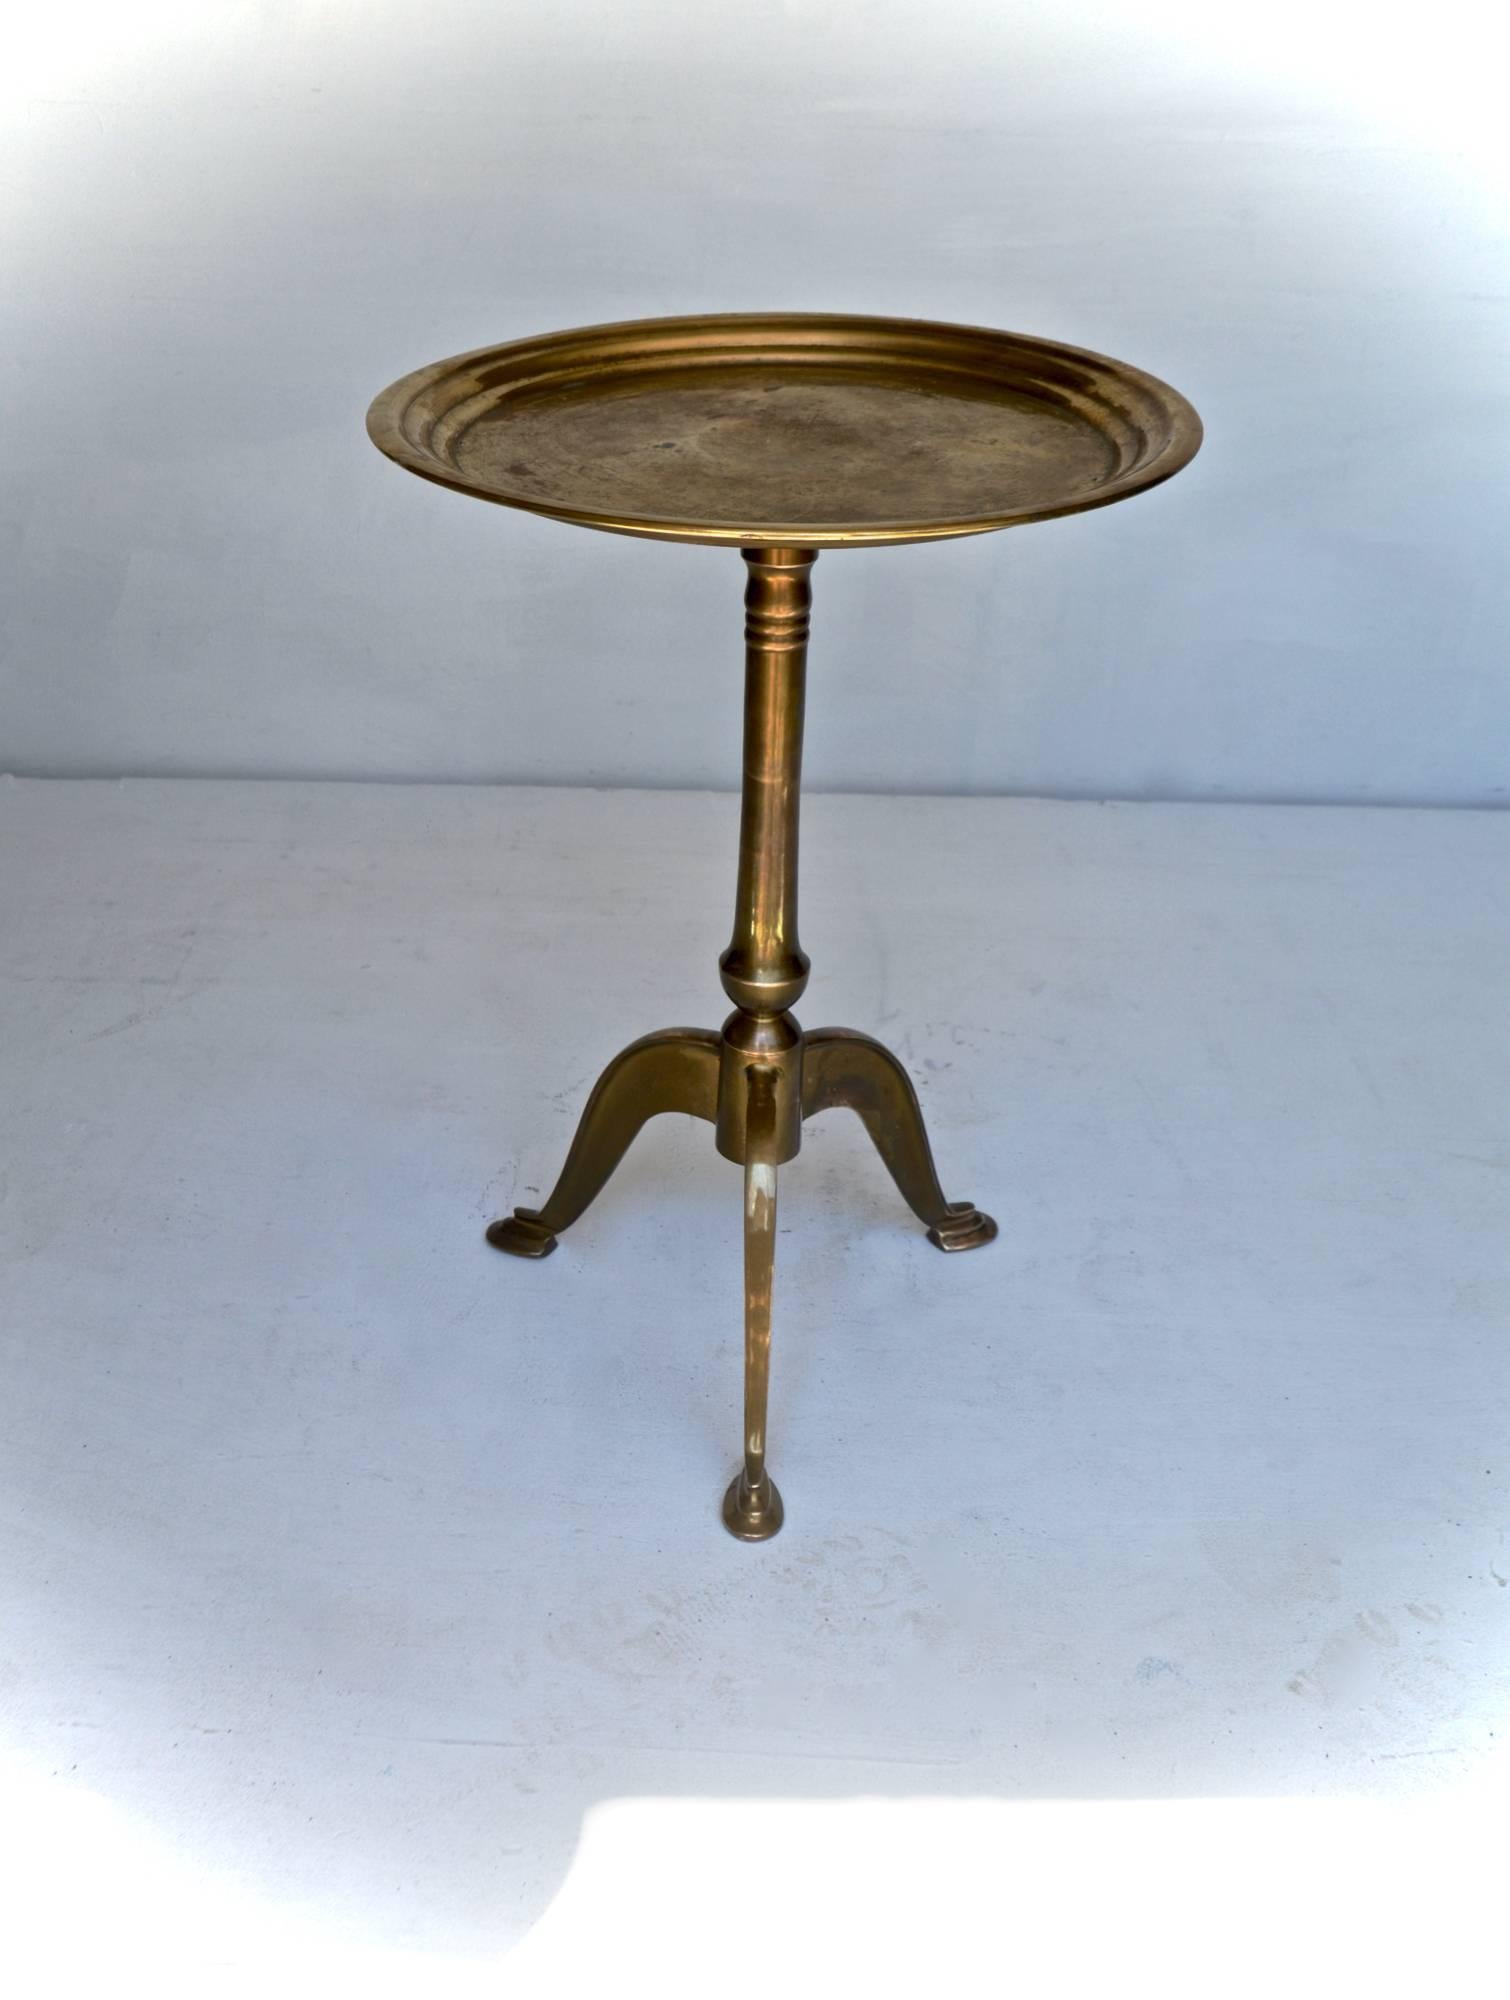 Stunning brass taboret table having a finely cast tripod base. The pedestal table unscrews in half for easy transport. A lovely patina and even tarnish throughout the vintage table.